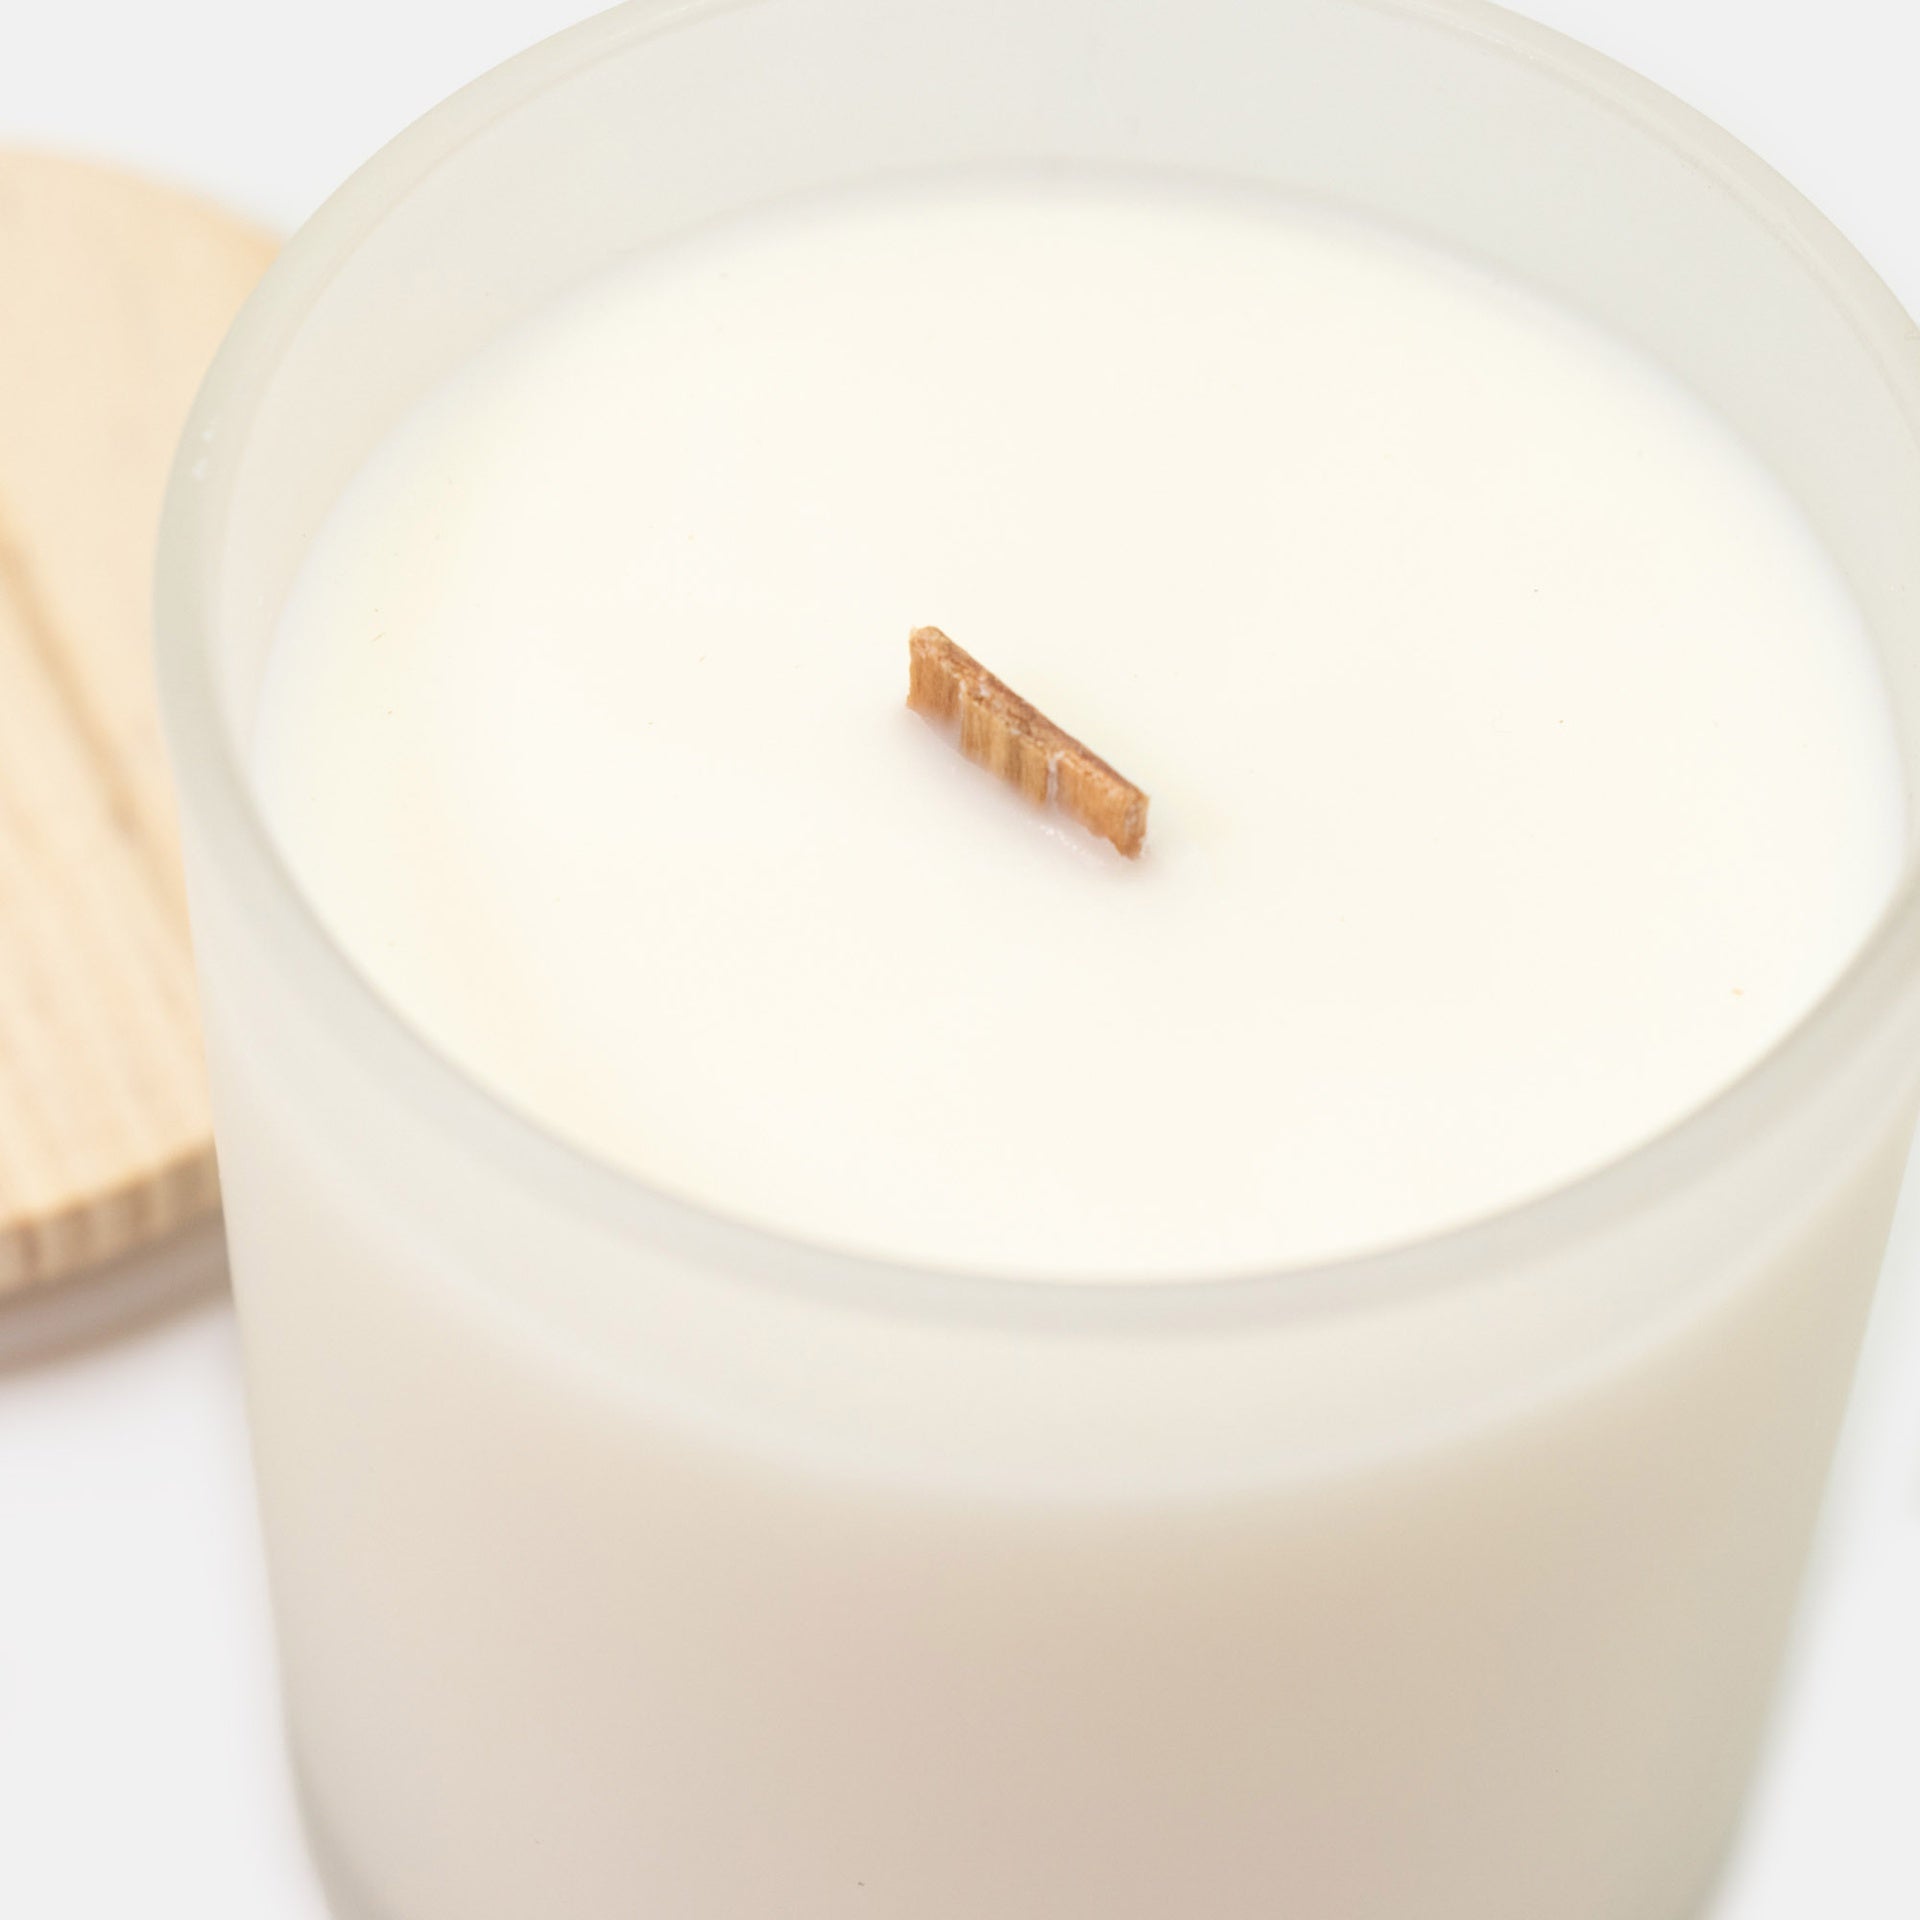 Calico Desert |11oz Candle | Stardew Valley Candles Threads & Thistles Inventory 